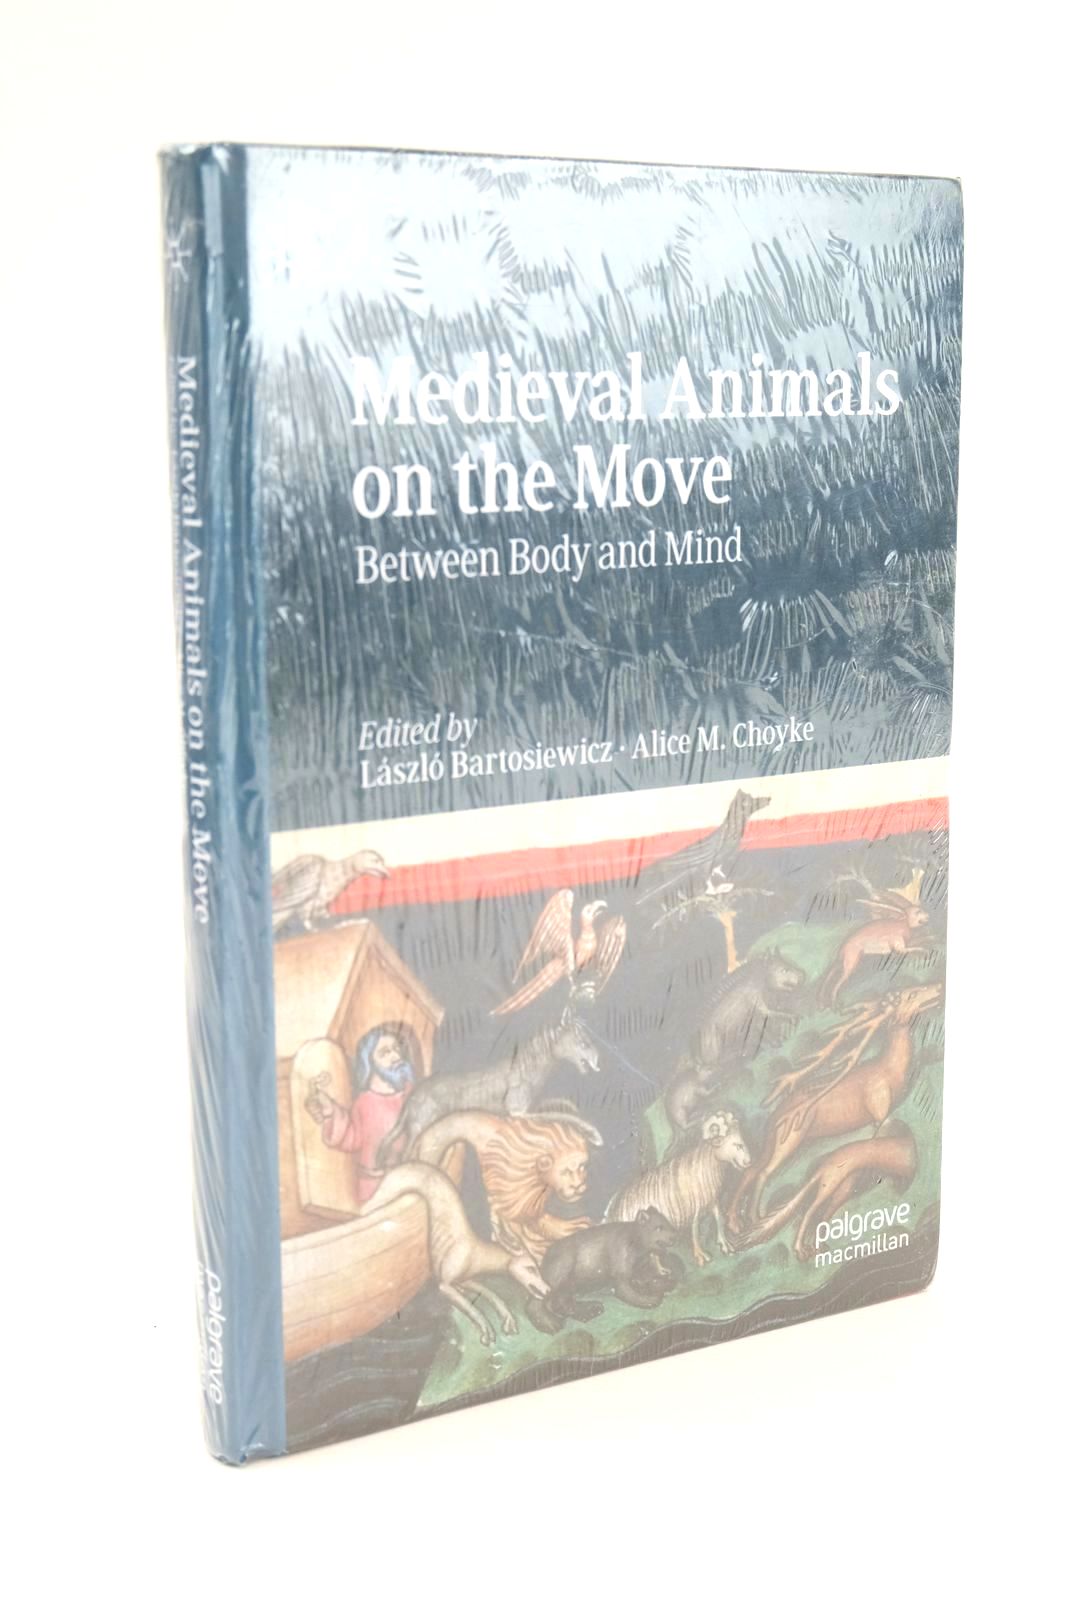 Photo of MEDIEVAL ANIMALS ON THE MOVE BETWEEN BODY AND MIND- Stock Number: 1324955